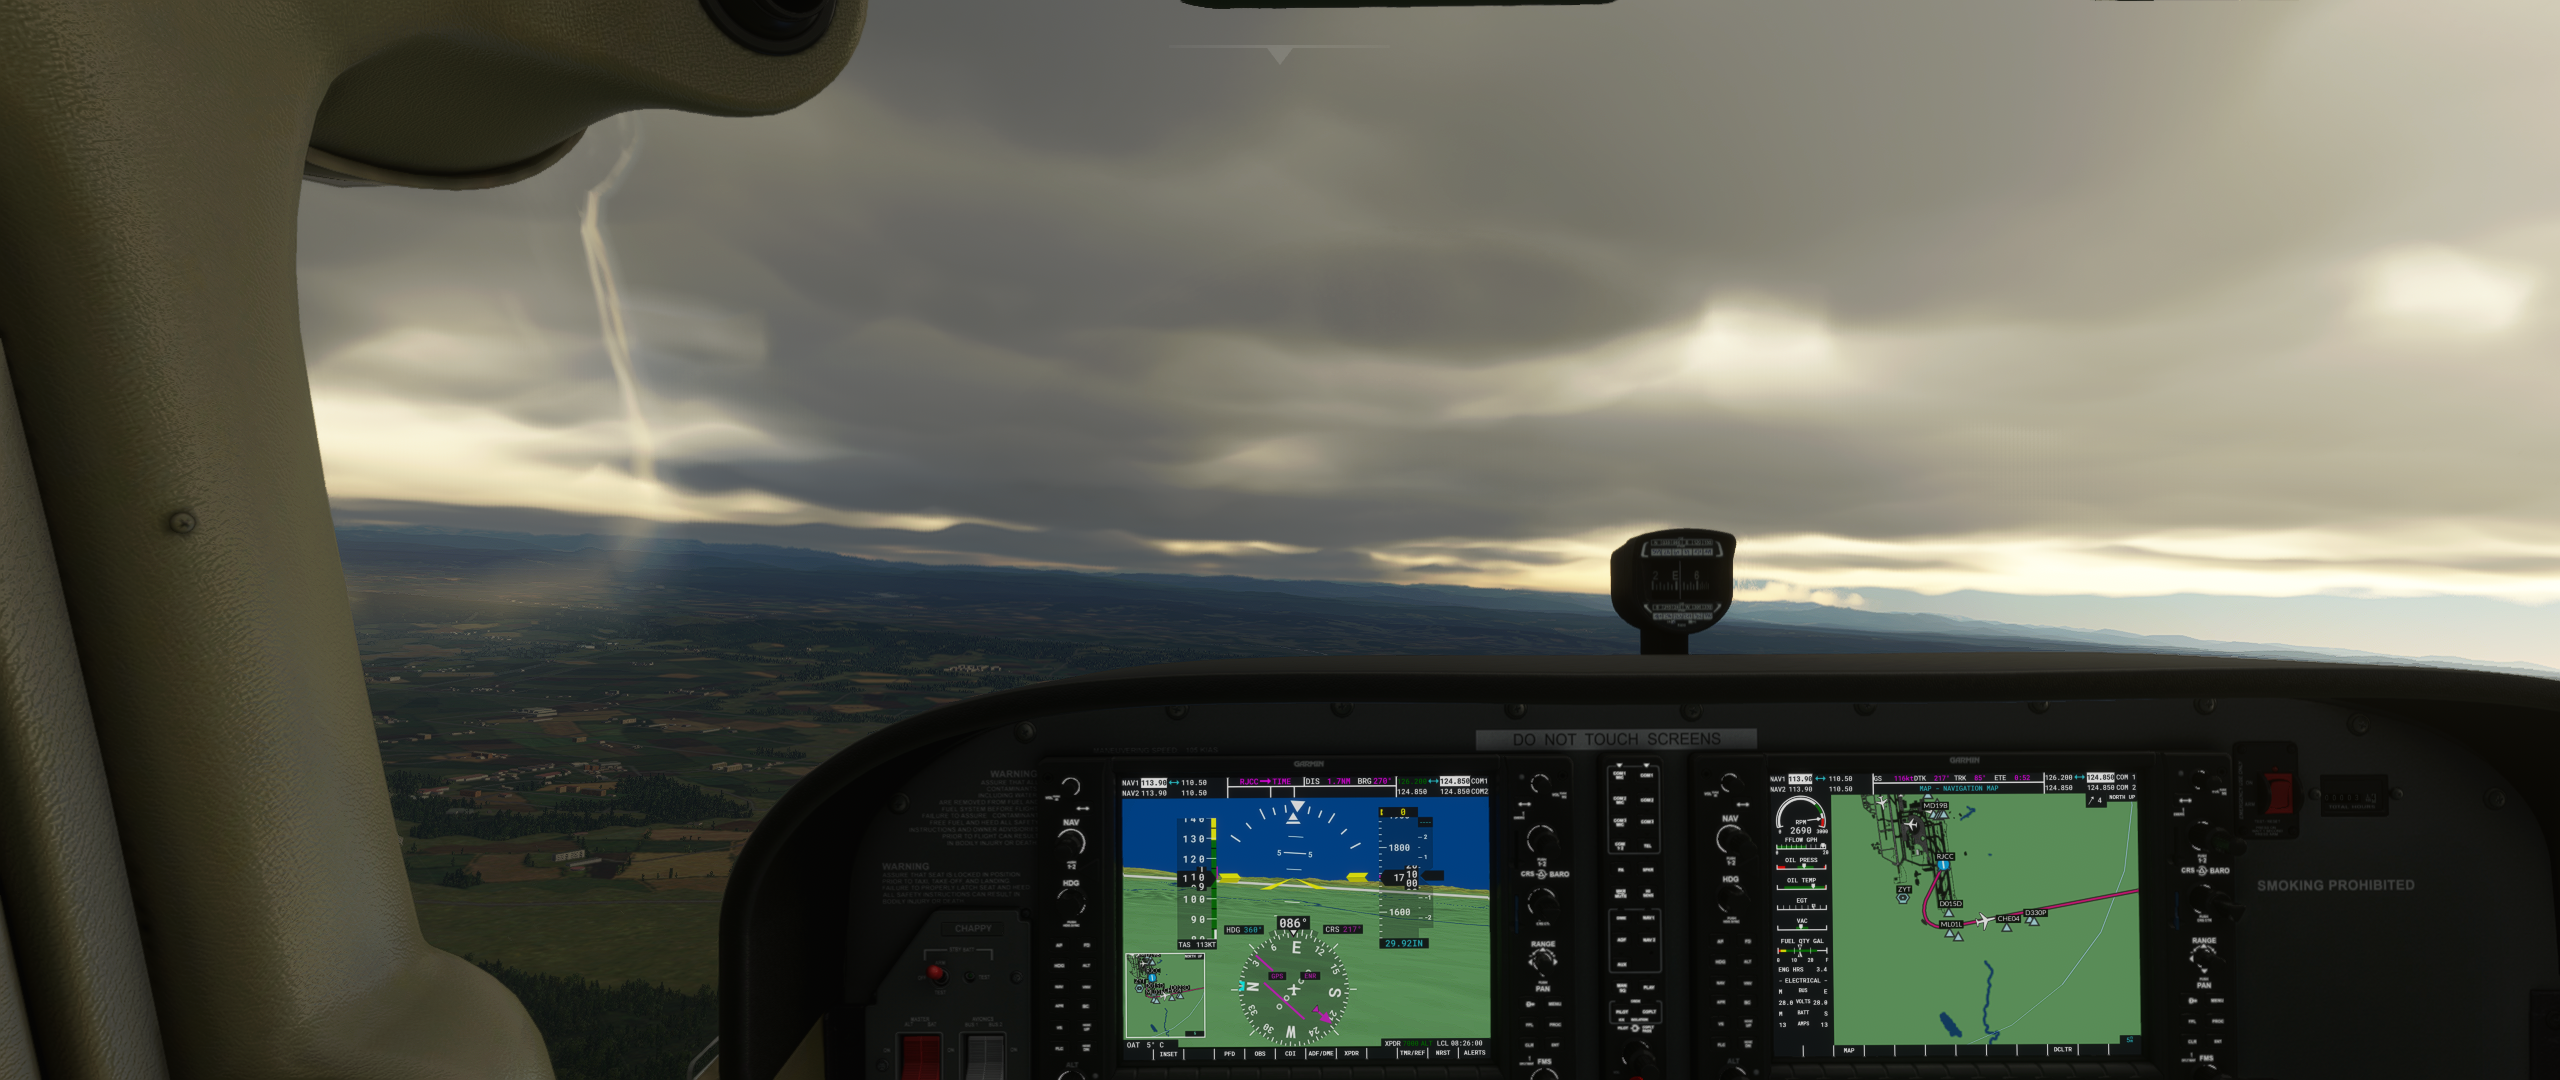 IMAGE(https://www.matchstickeyes.com/wp-content/uploads/2021/11/Flight-Simulator-Sapporo-departure-1.png)